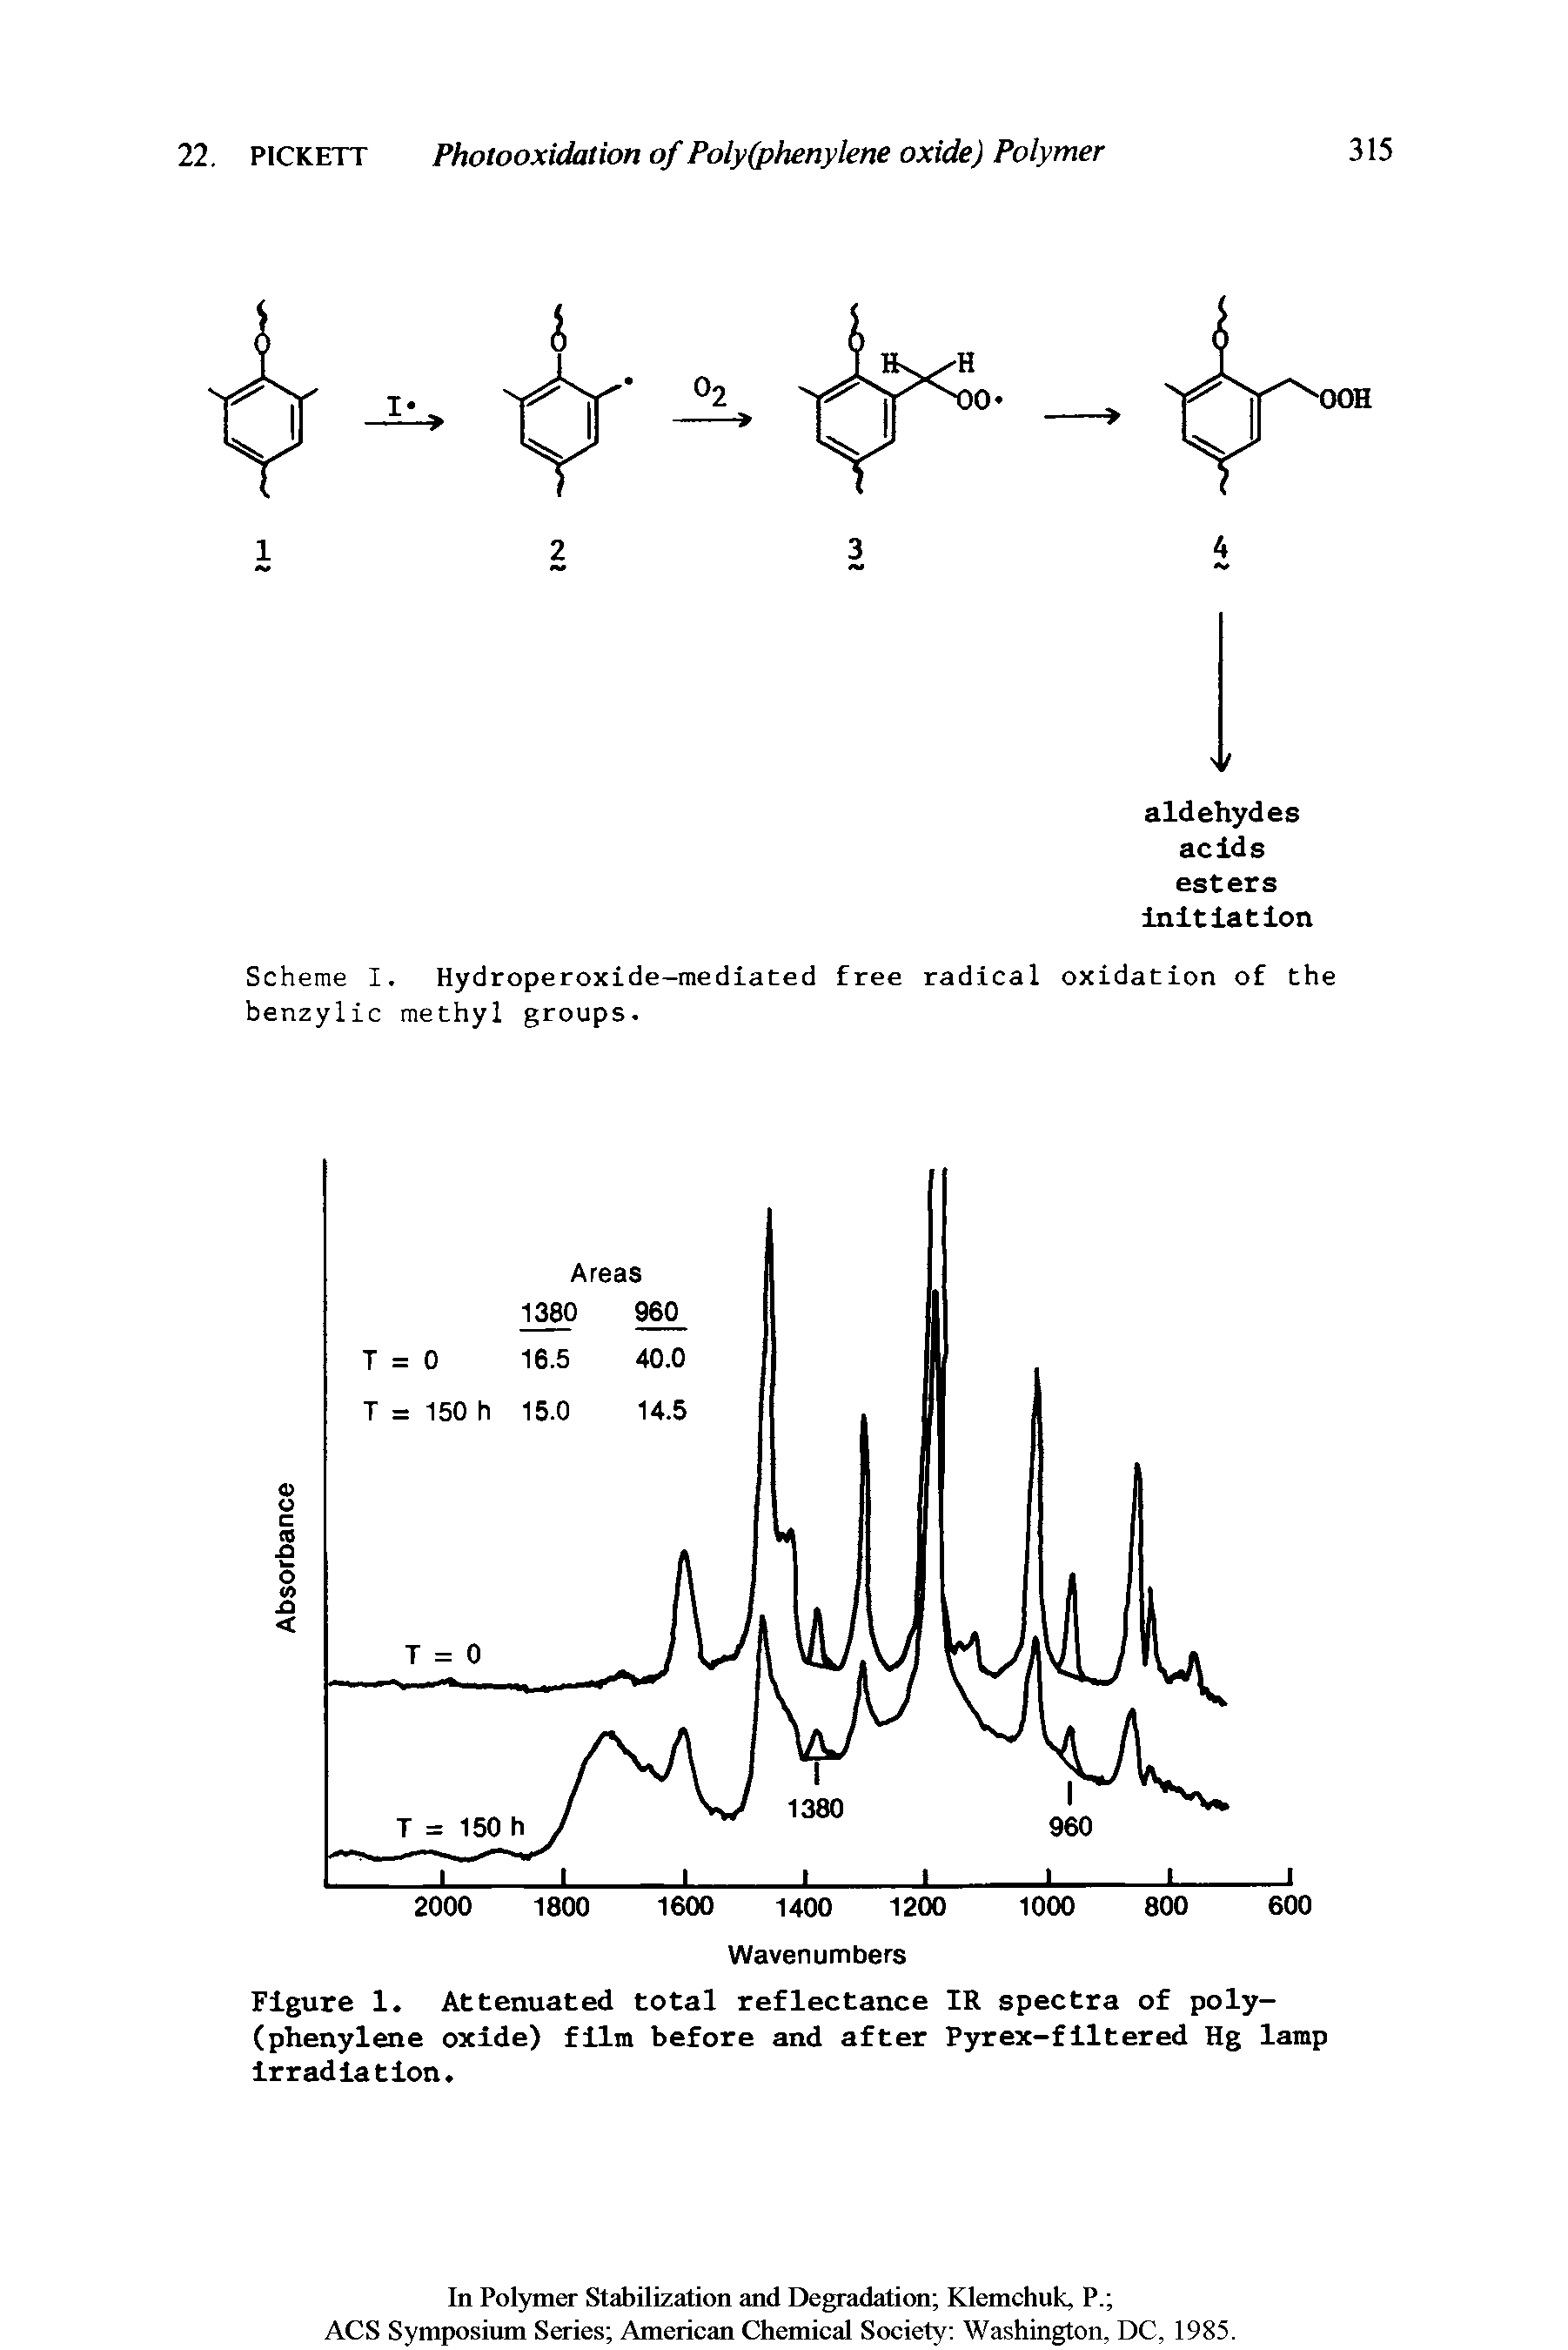 Figure 1. Attenuated total reflectance IR spectra of poly-(phenylene oxide) film before and after Pyrex-filtered Hg lamp irradiation.